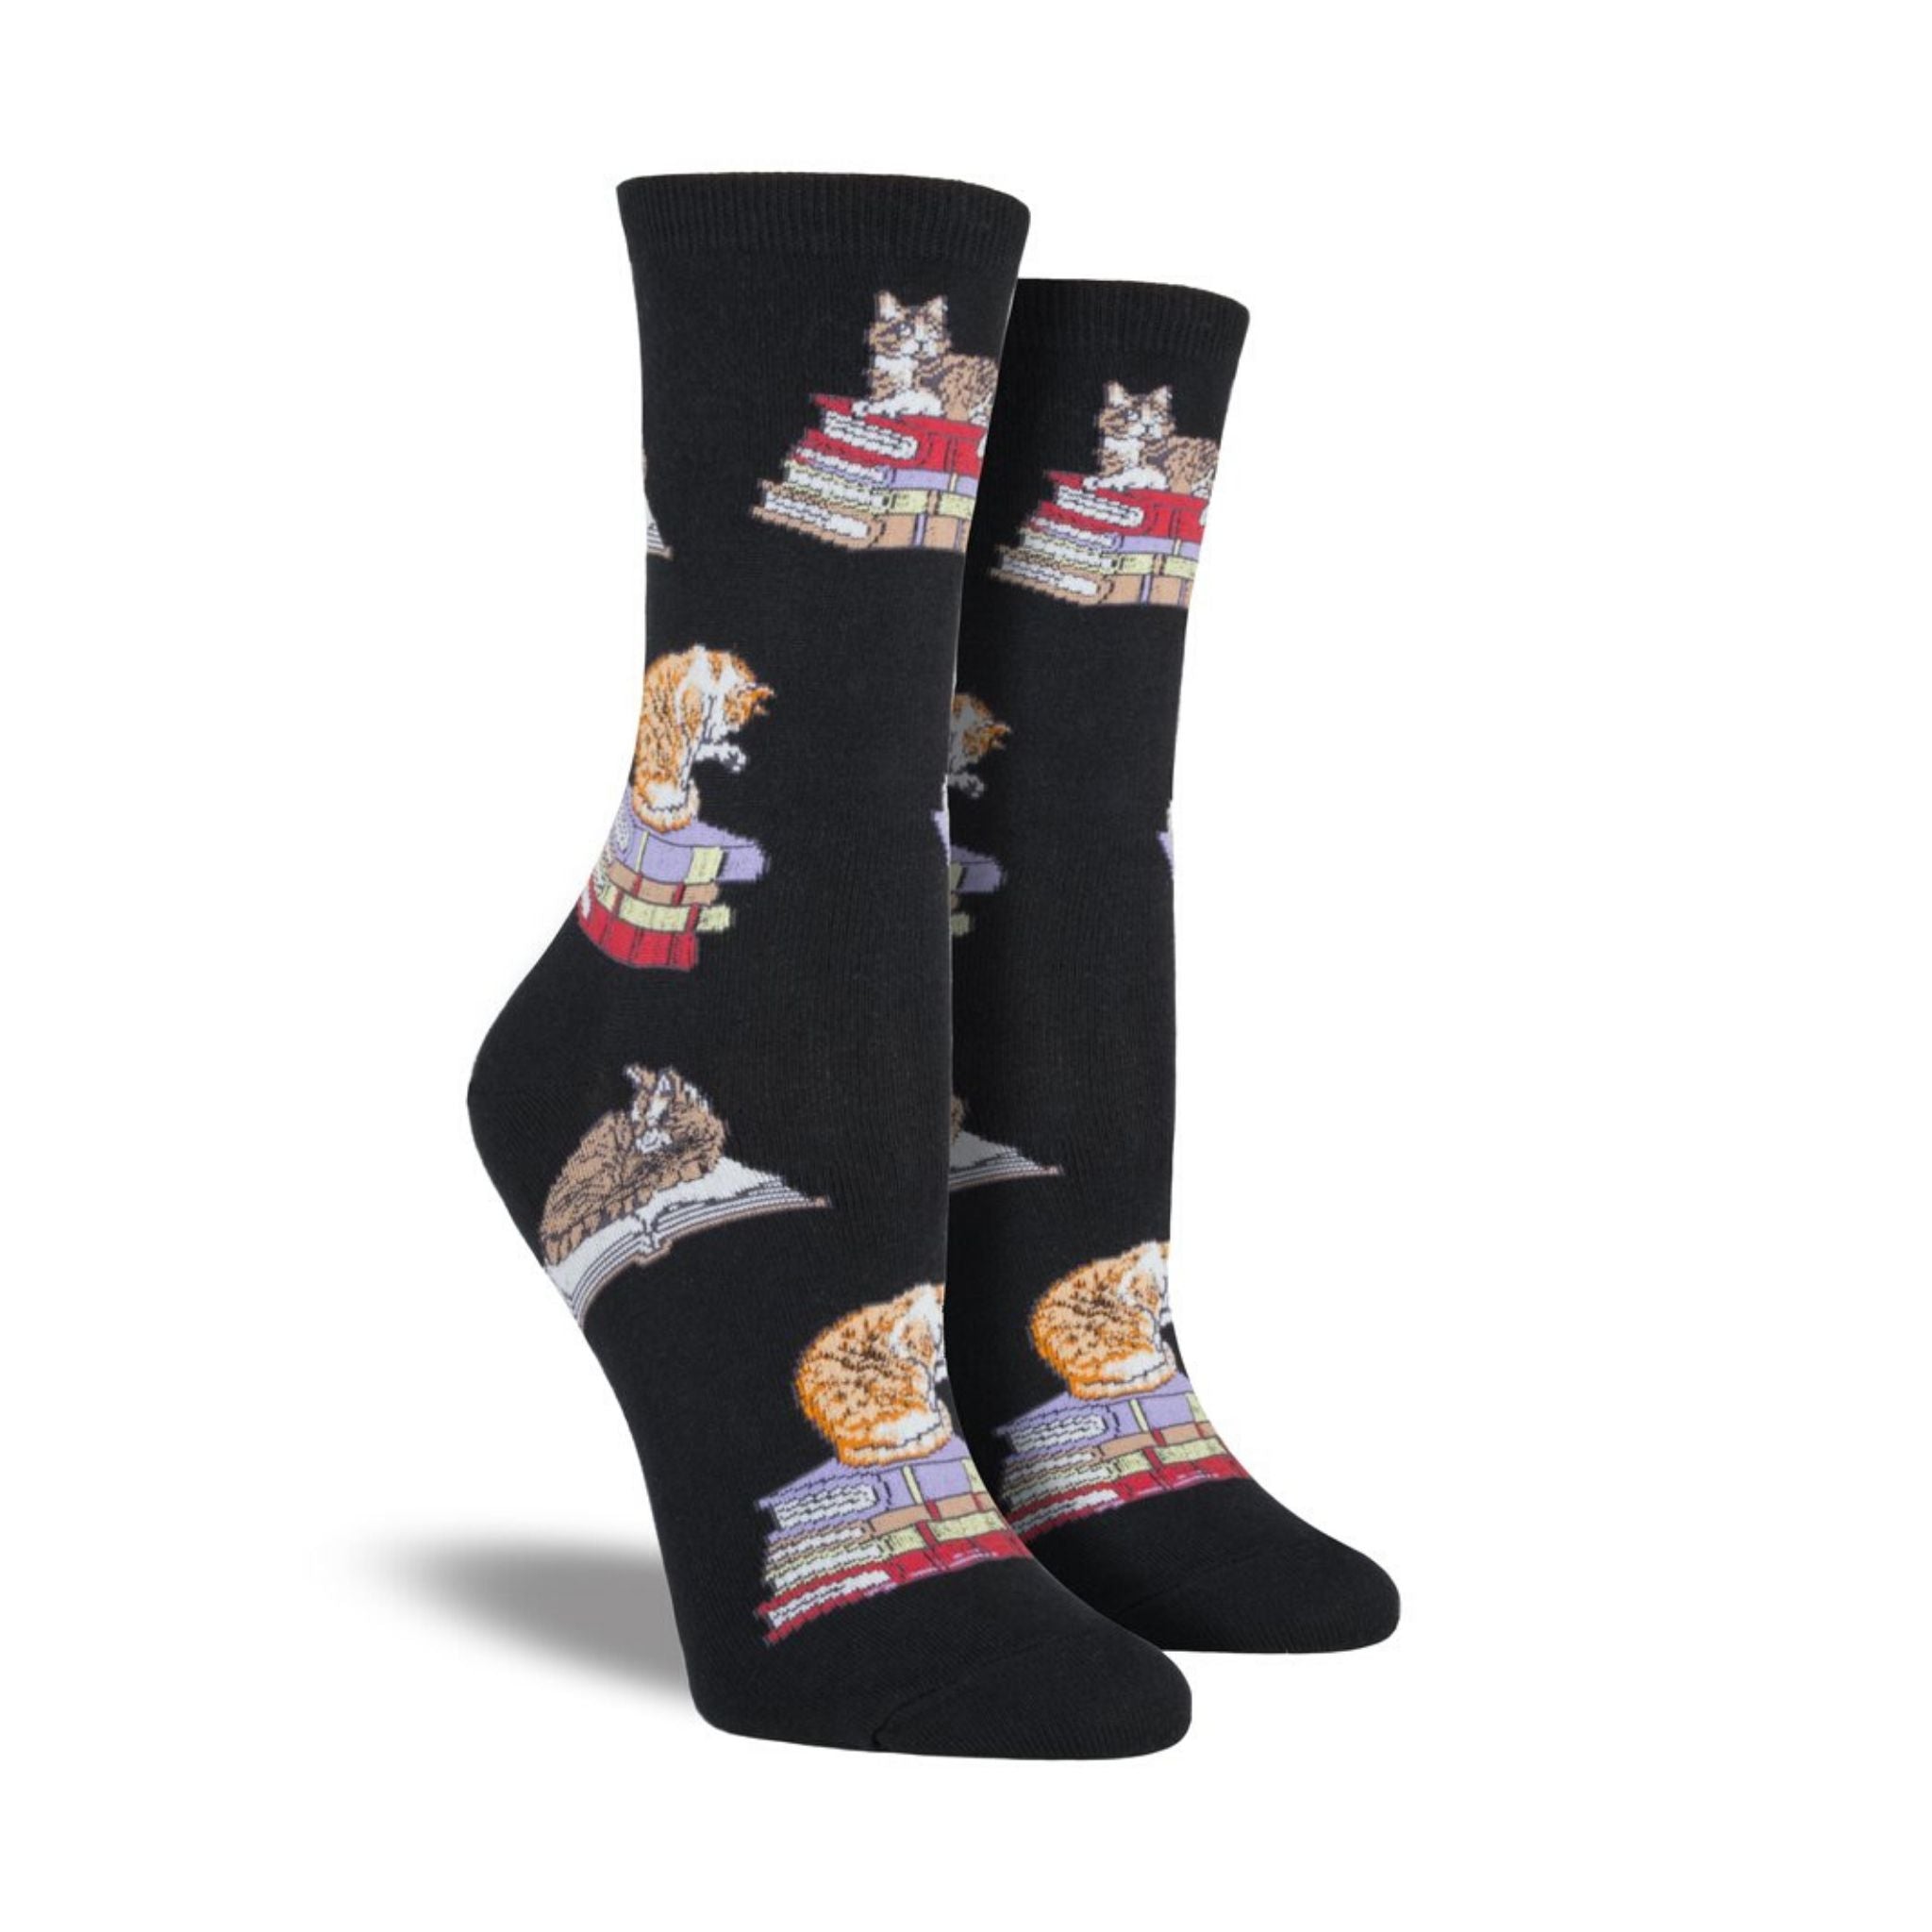 Black socks with cats sitting on books